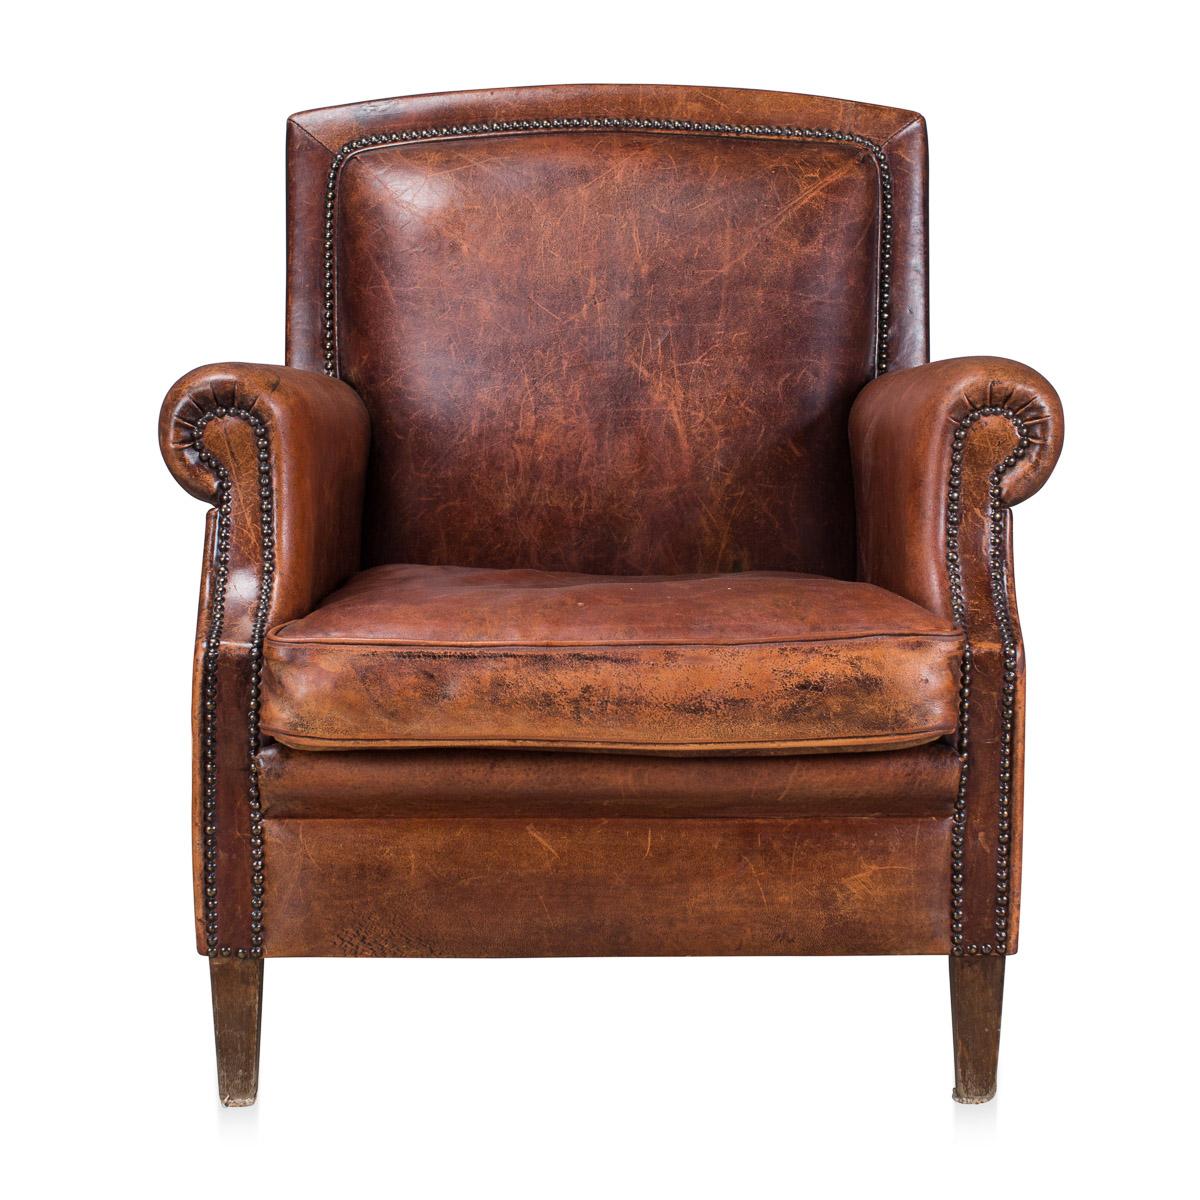 A wonderful sheepskin leather armchair, mid-late 20th century, manufactured in Holland and of the finest quality with great patina, removable cushion with studded backrest.
 
Condition:

In great condition - some scuffs and wear consistent with